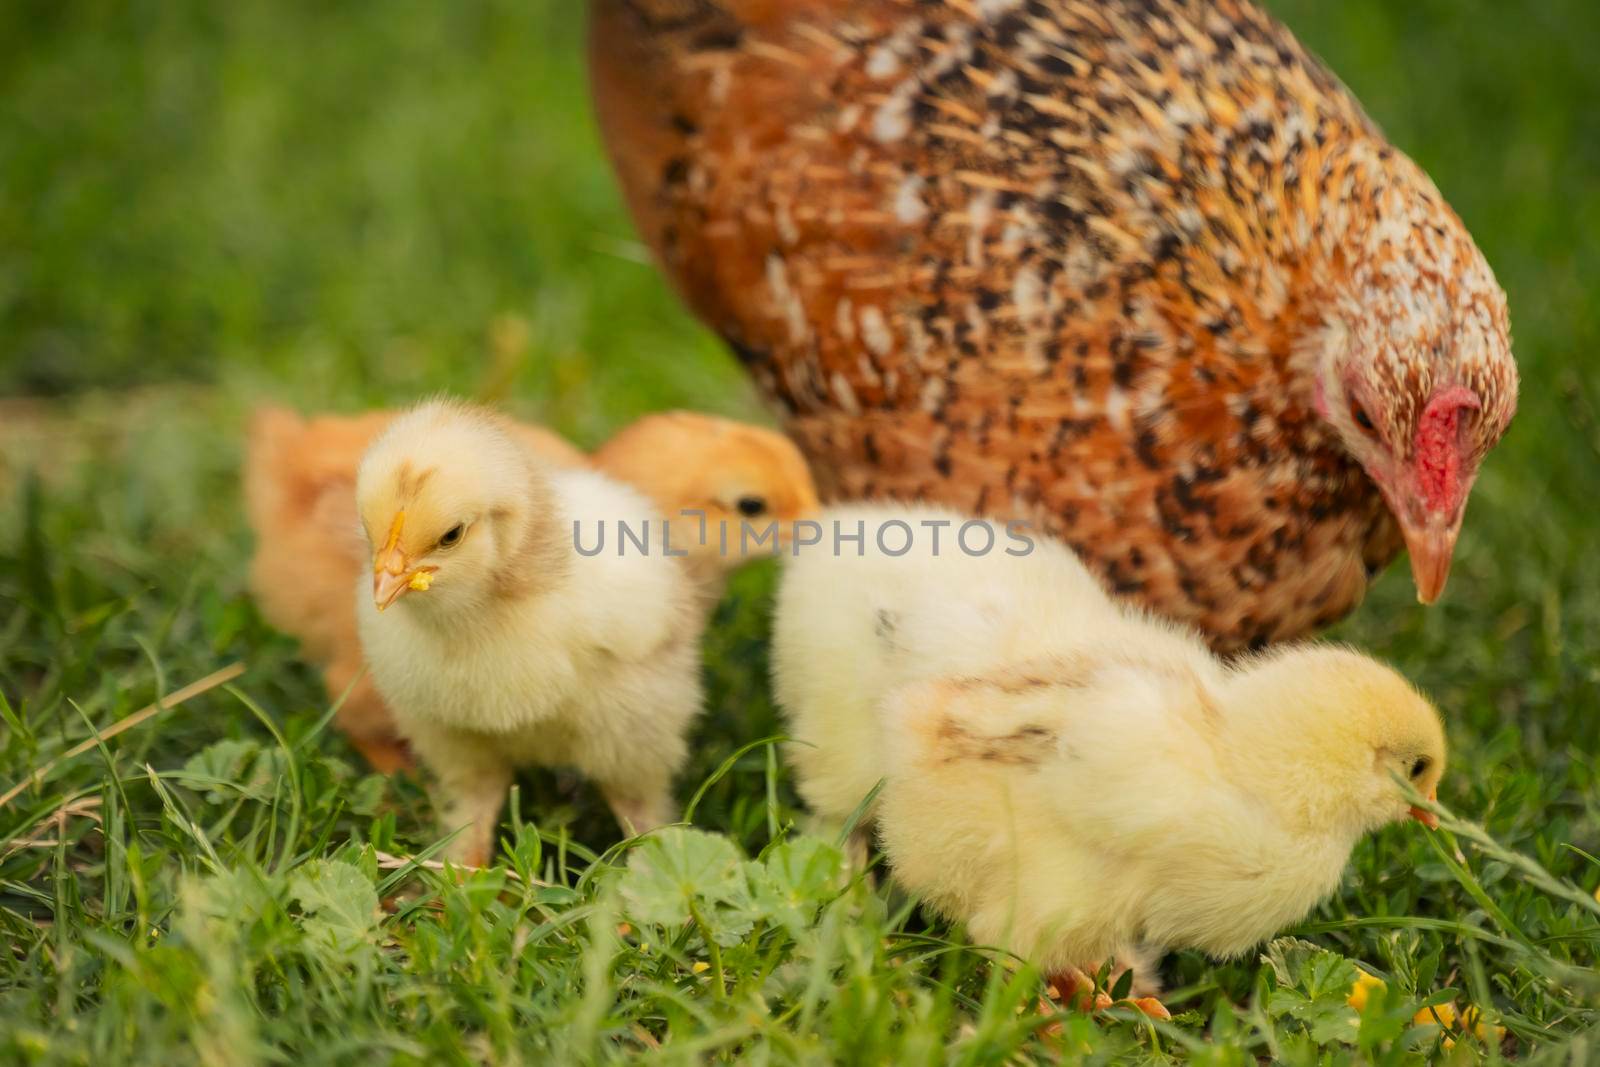 chickens with their mother walk on the grass, close-up